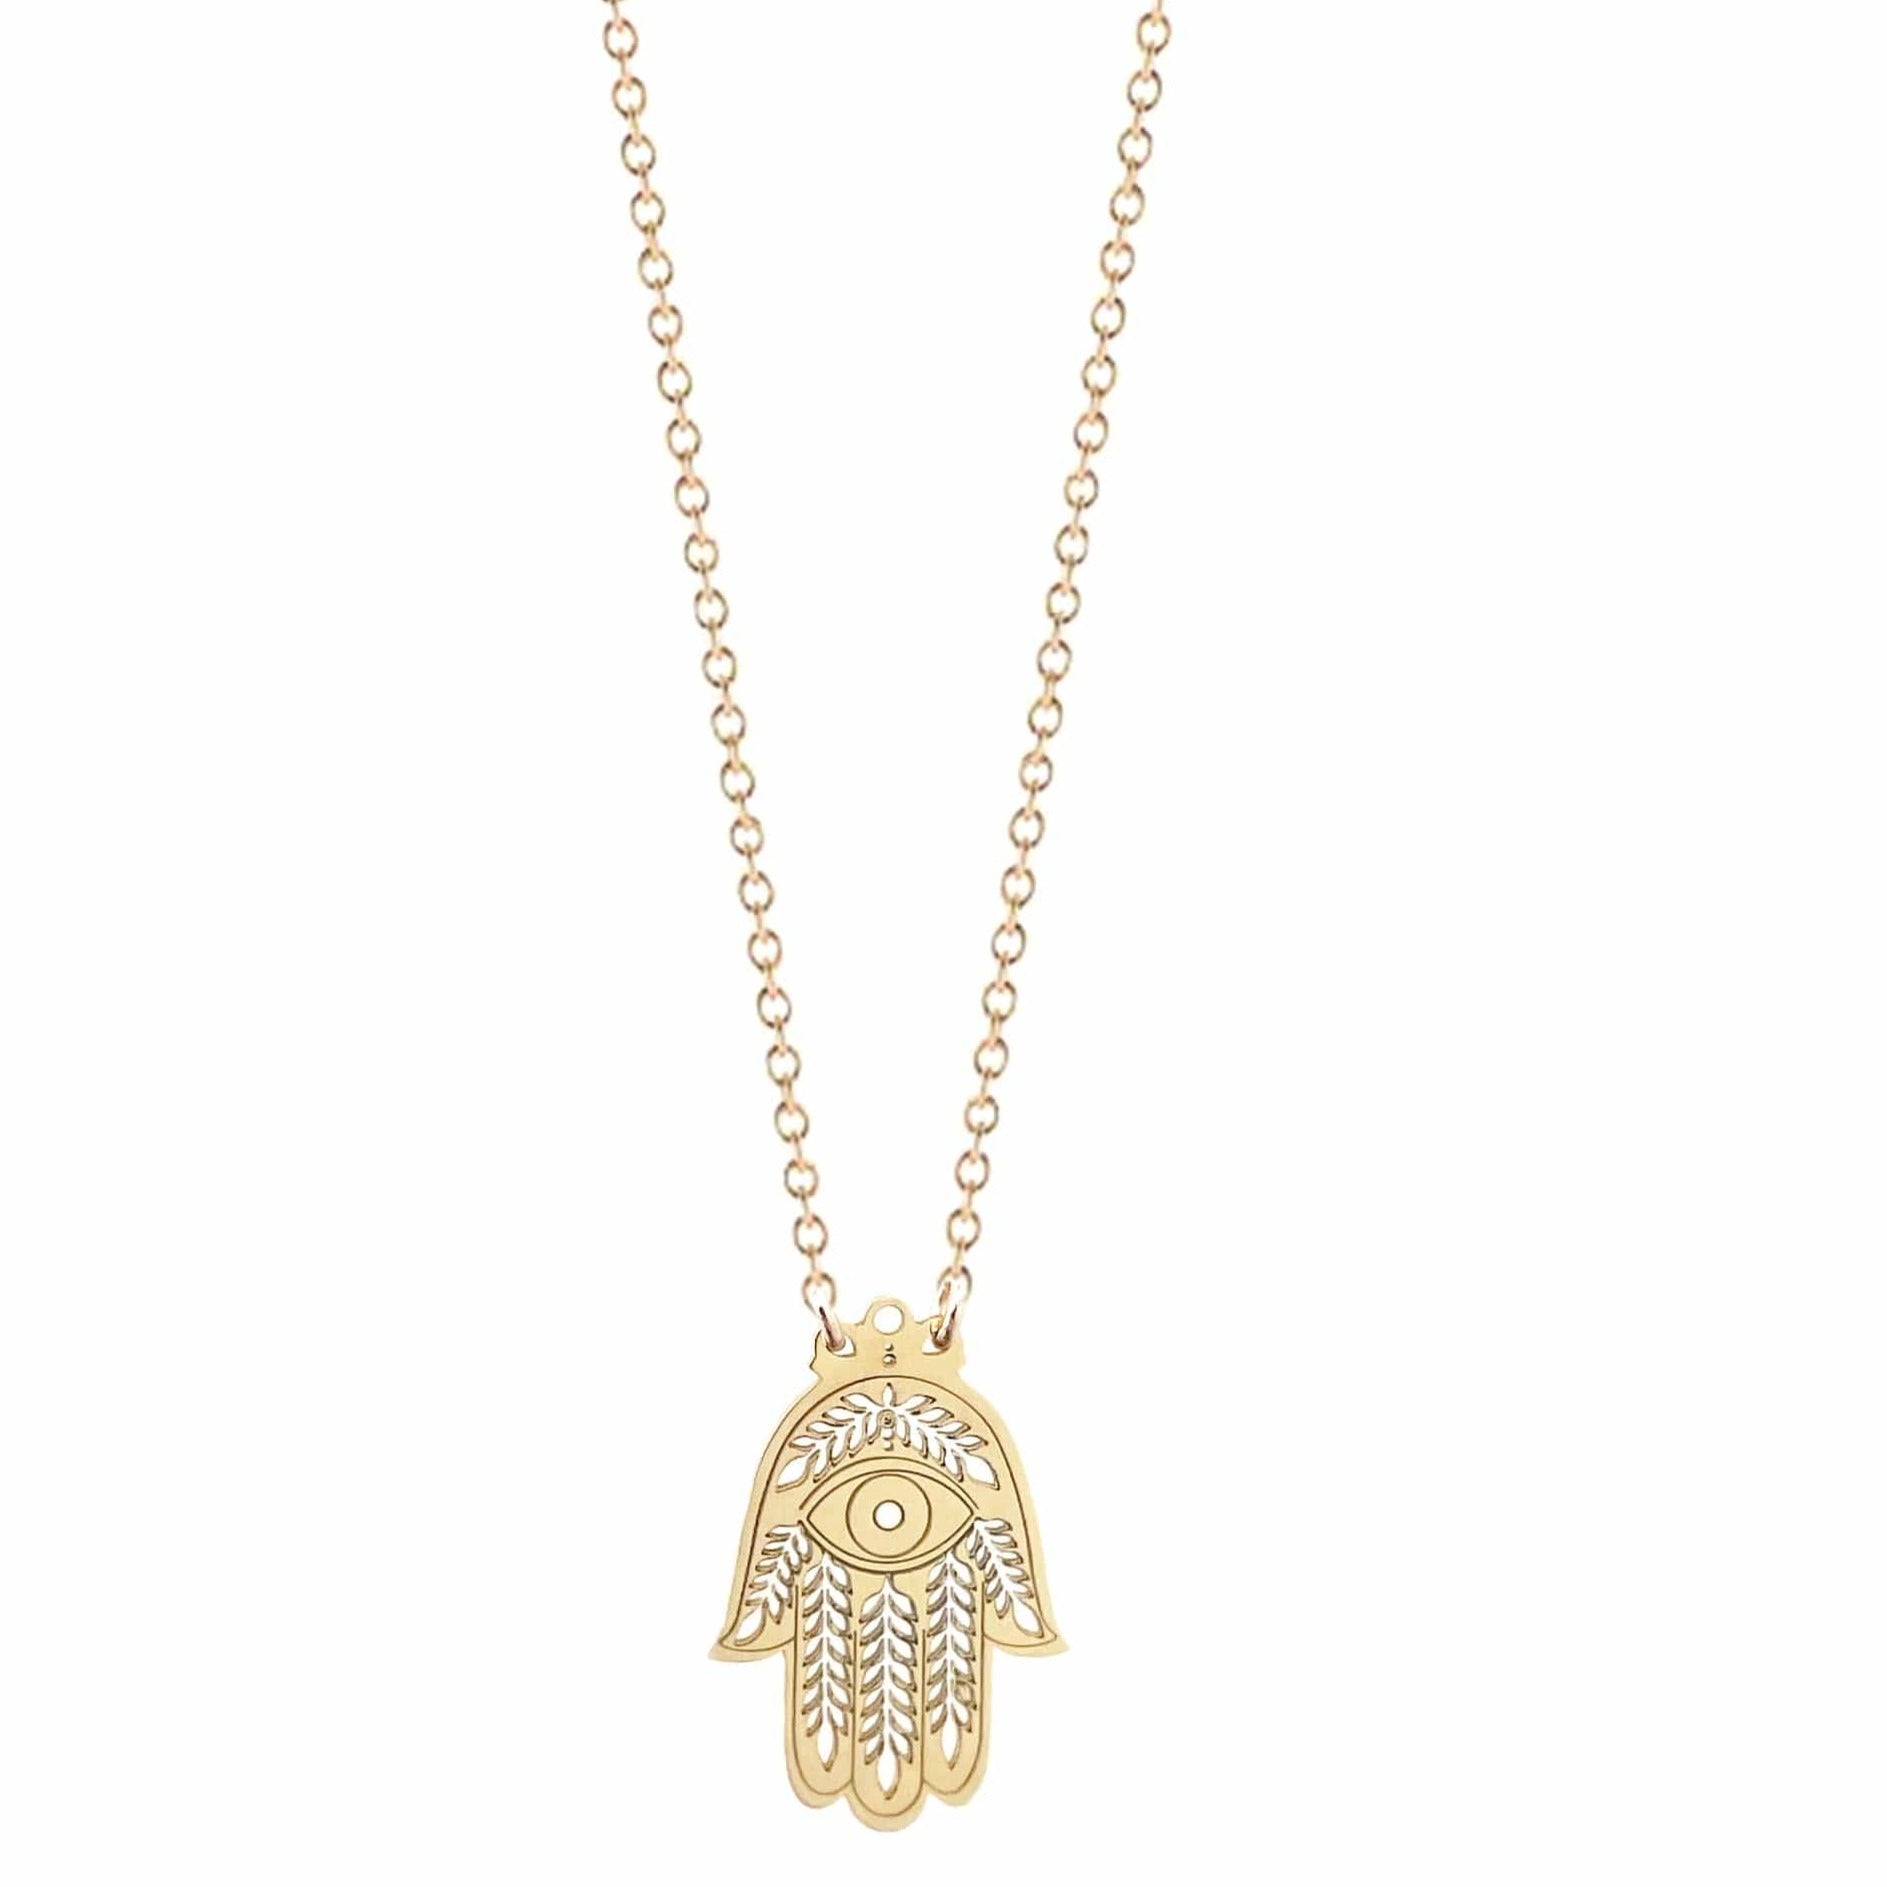 Miriam Merenfeld Jewelry Necklaces Lily Hamsa Necklace - Gold or Sterling Silver